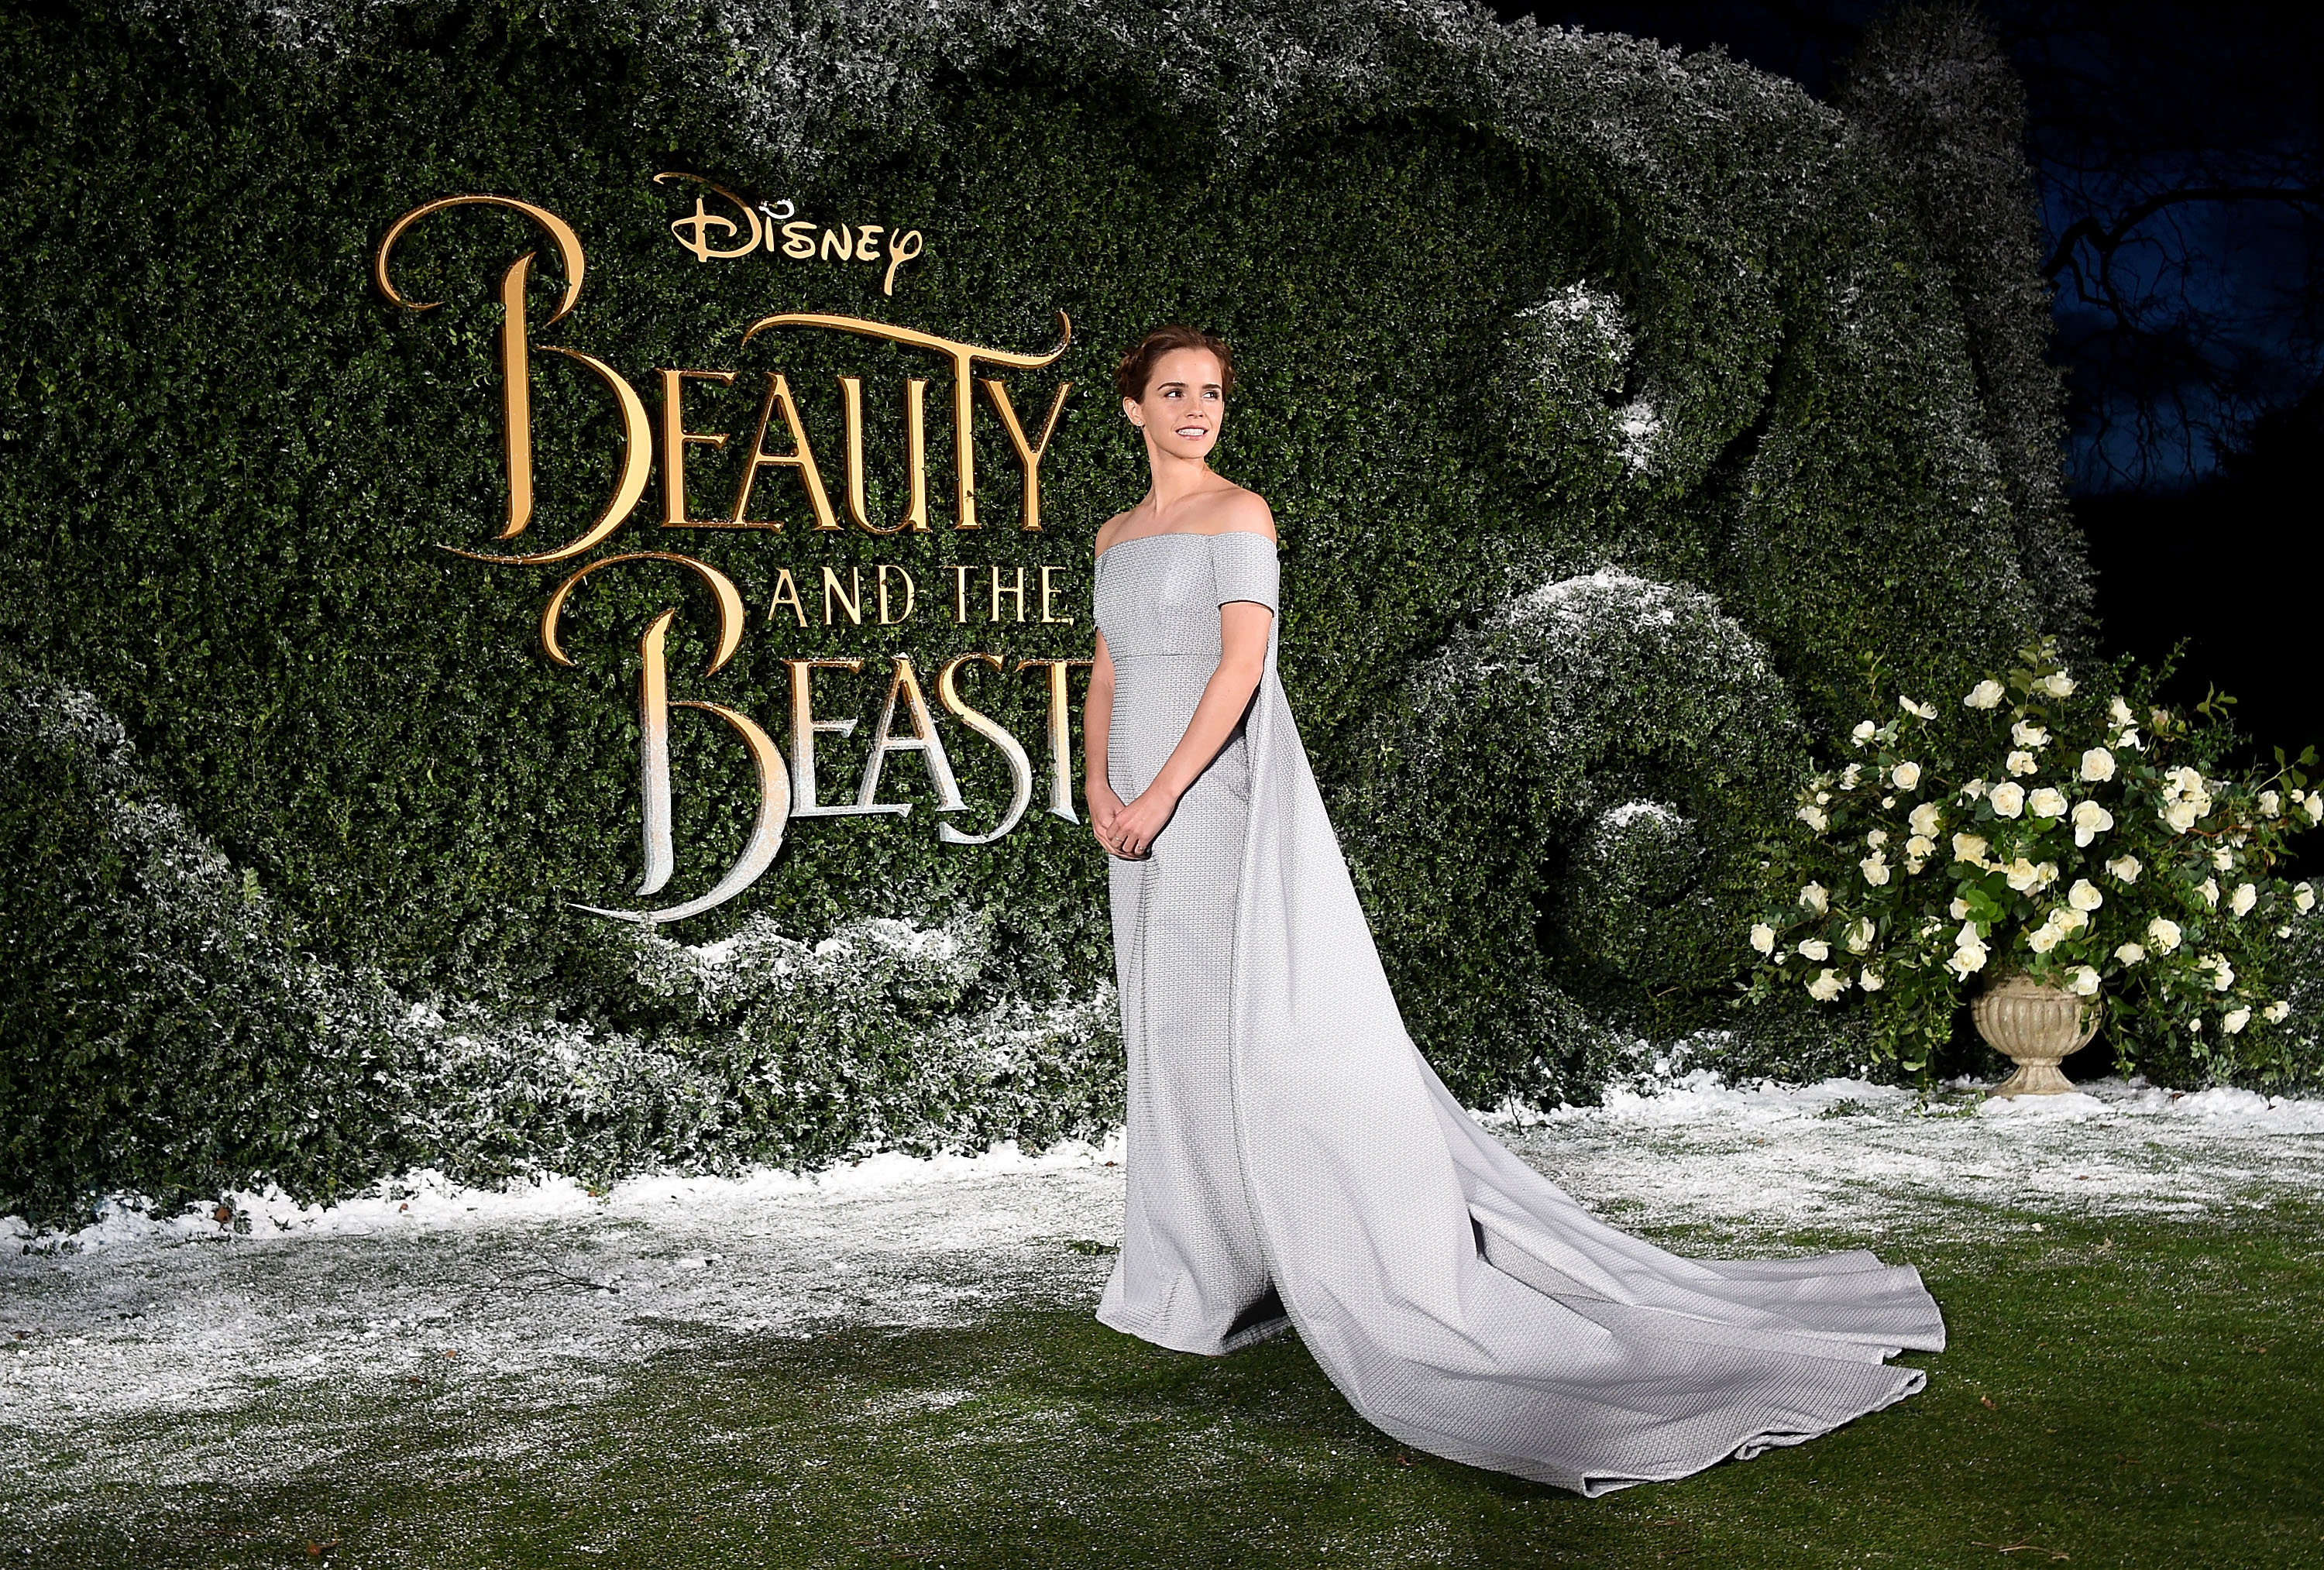 London UK : Emma Watson attends the UK launch event and special screening of Disney's "Beauty and the Beast". February, 23rd 2017. (Credit: StillMoving.net for Disney)